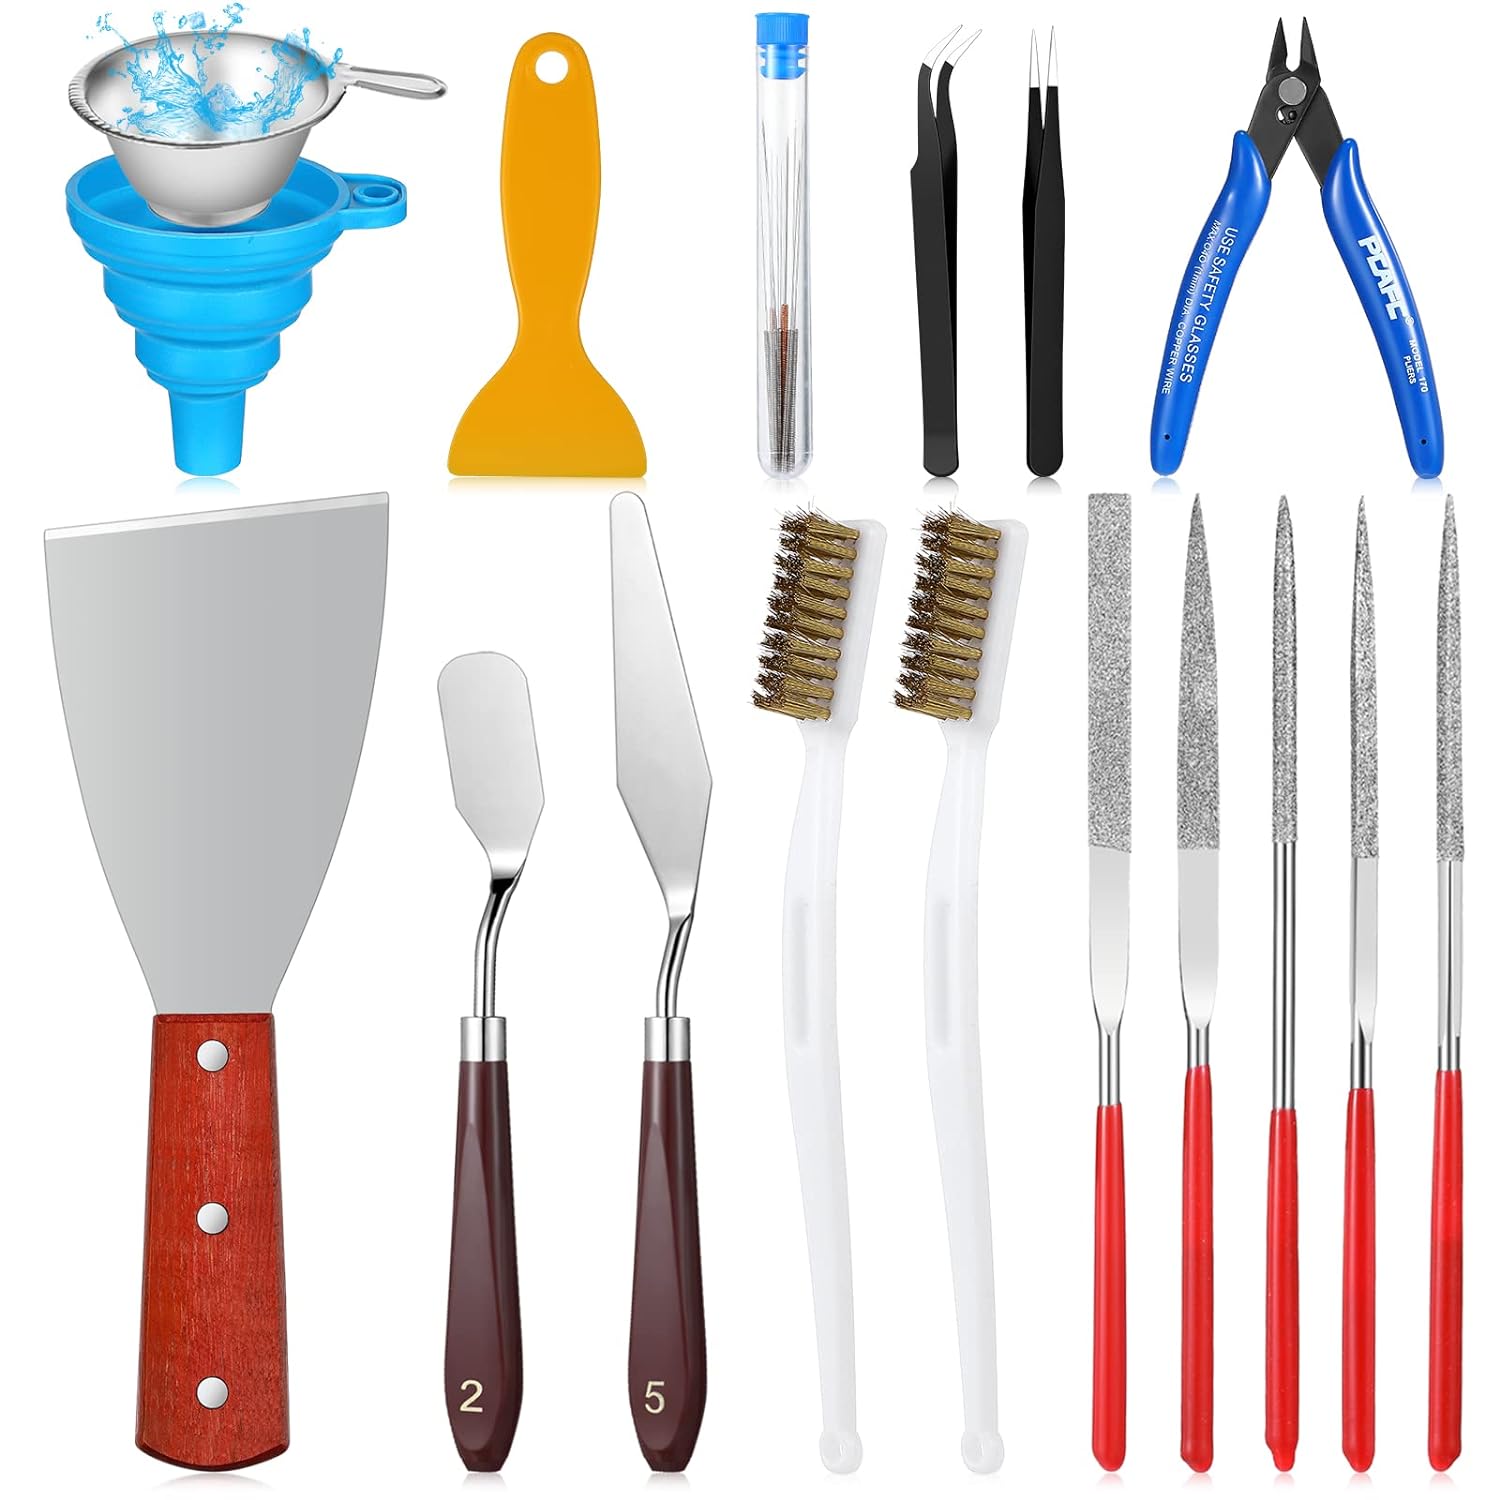 25-pcs-3d-printer-tools-kit-3d-printing-accessories-include-2-wire-brush-1-putty-knife-1-plastic-shovel-5-diamond-files- 25 Pcs 3D Printer Tools Kit Review